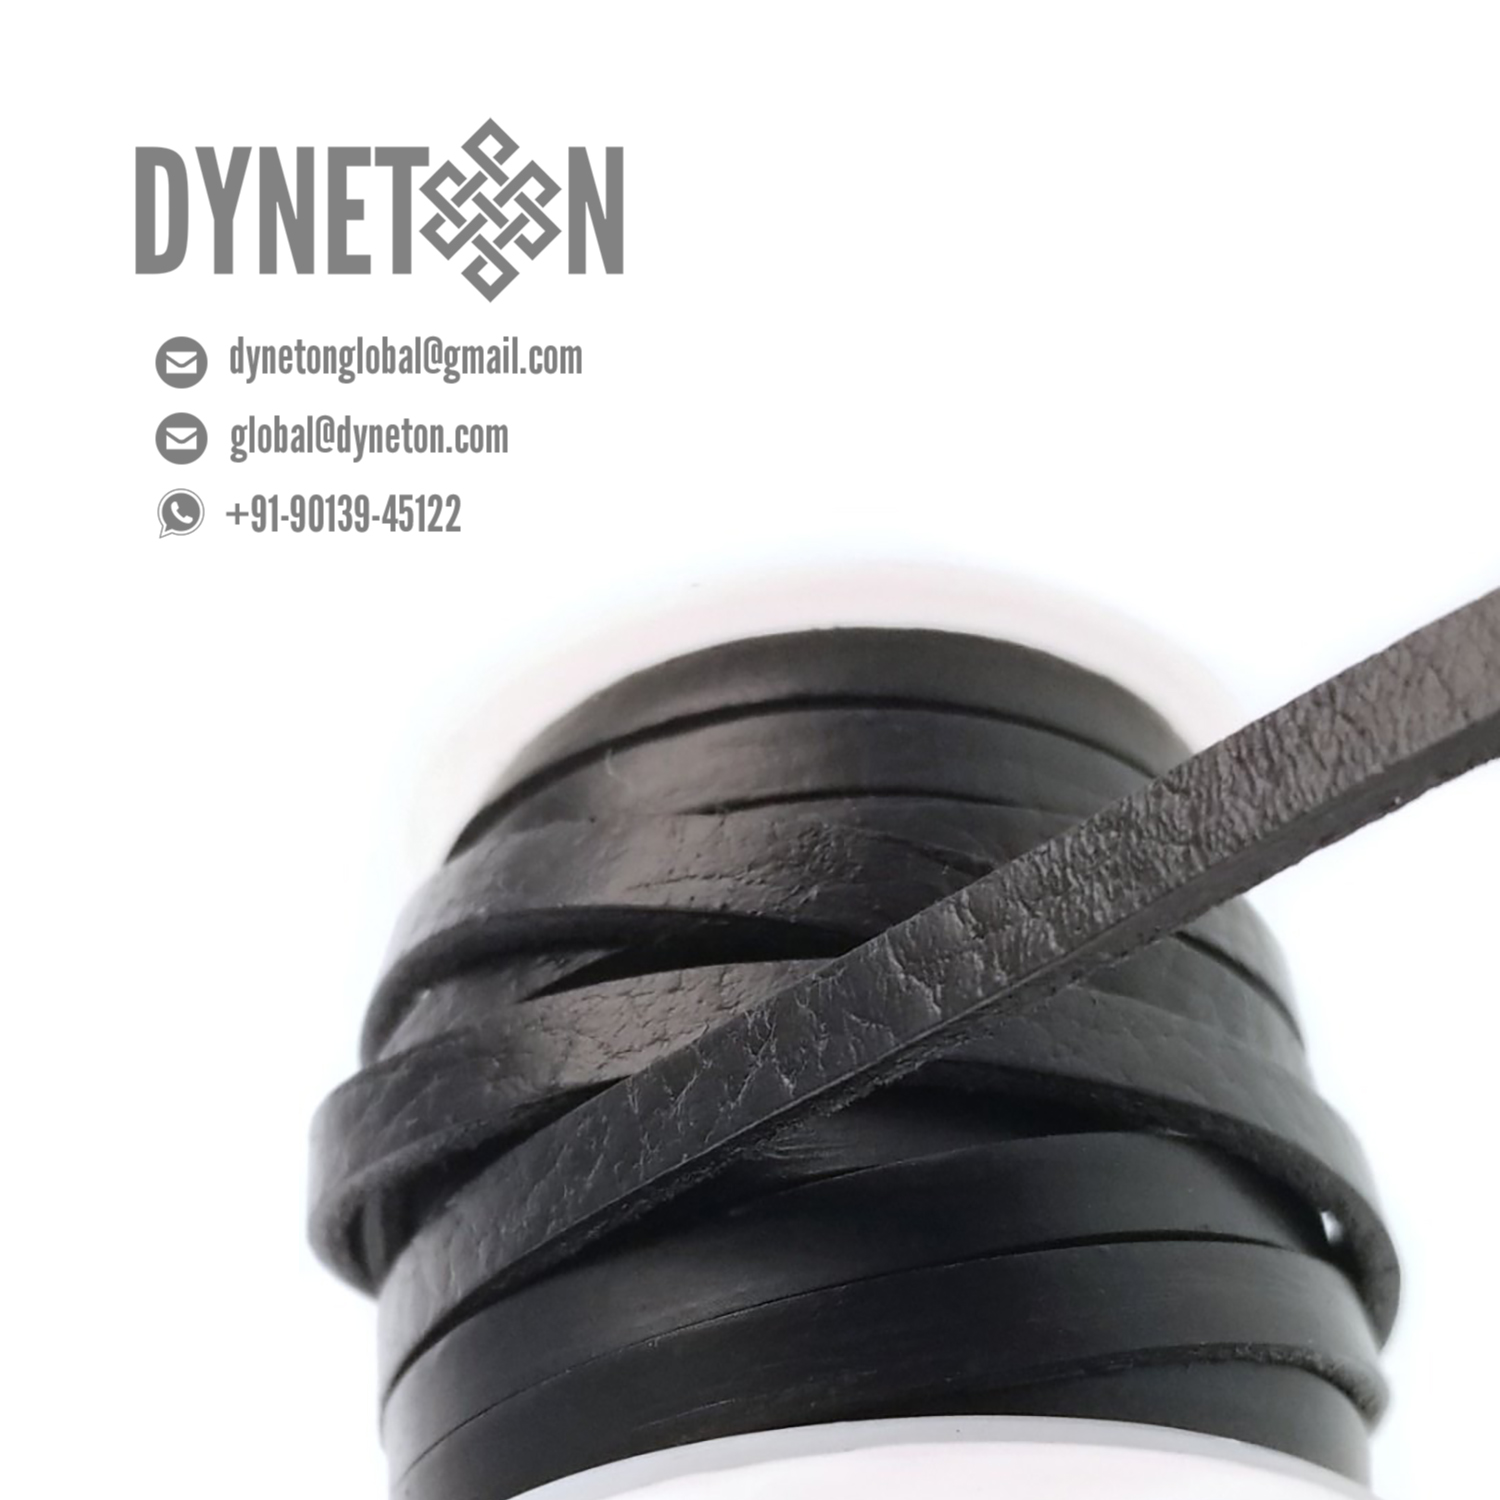 7mm Flat Leather Cord - DYNETON / Flat Leather Cords 7 mm